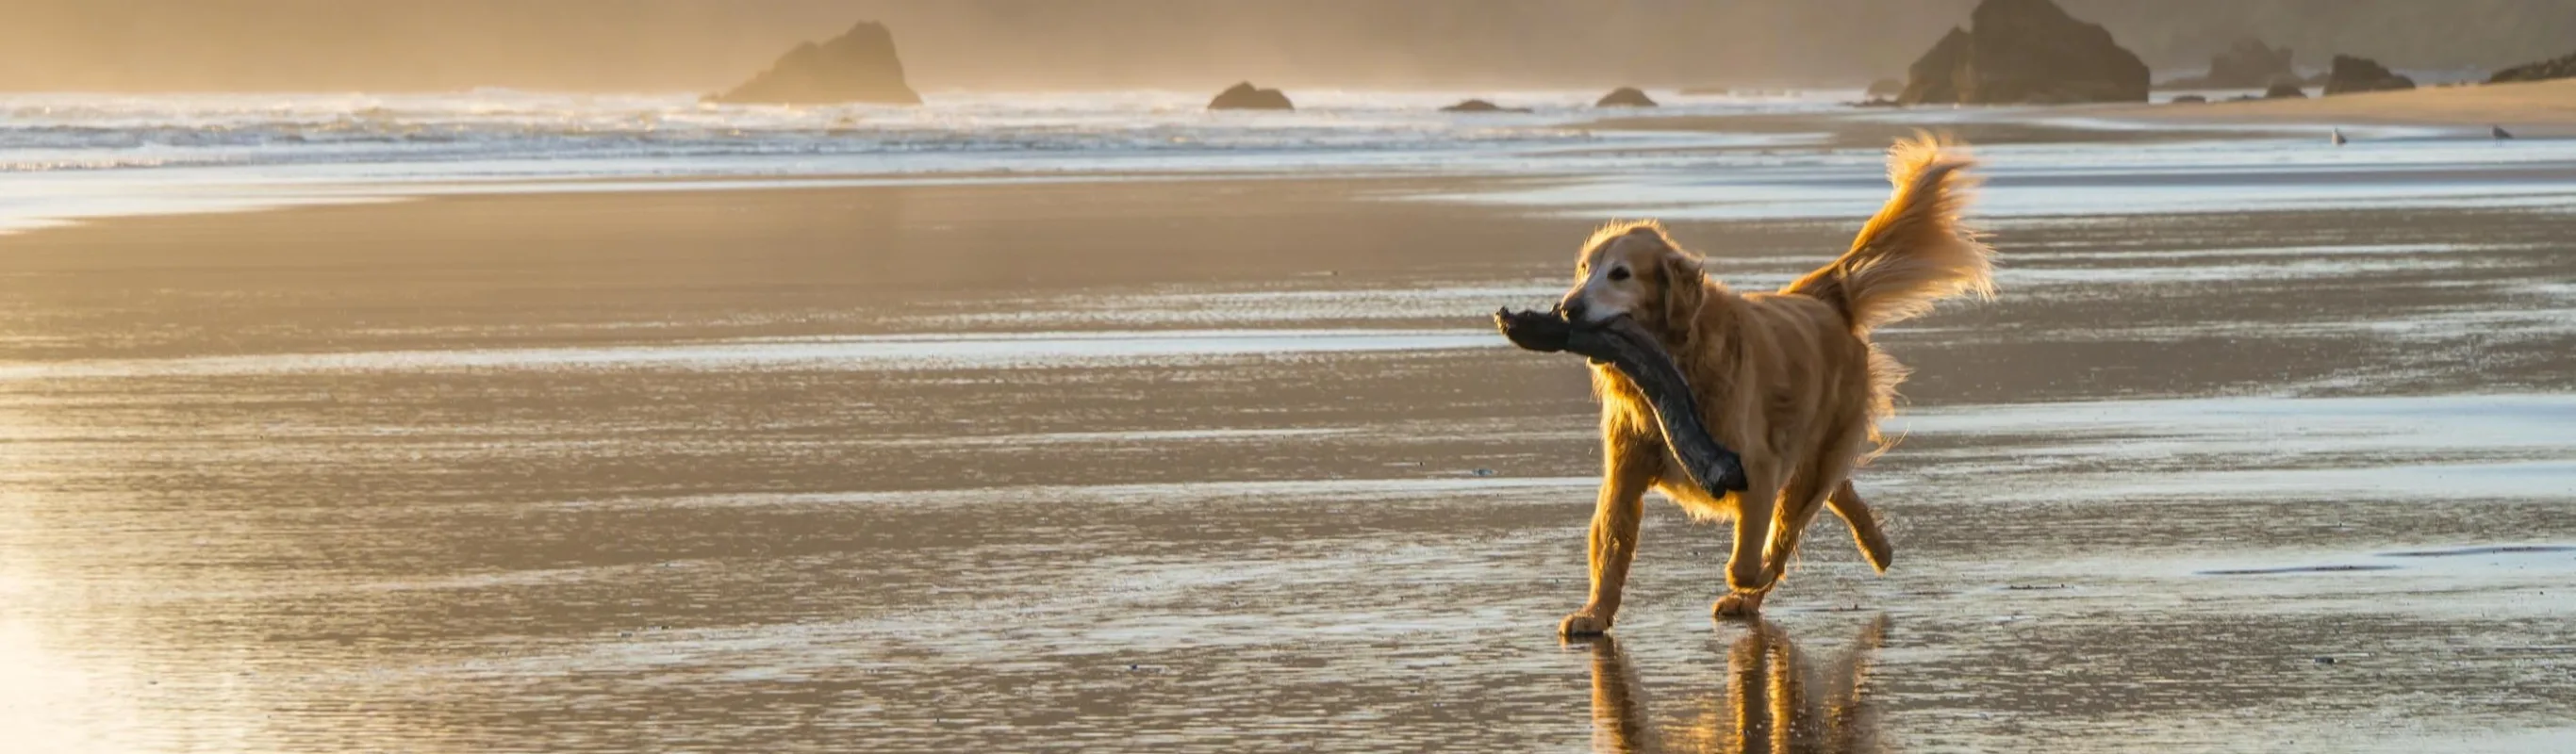 Dog running along the beach with a log in its mouth